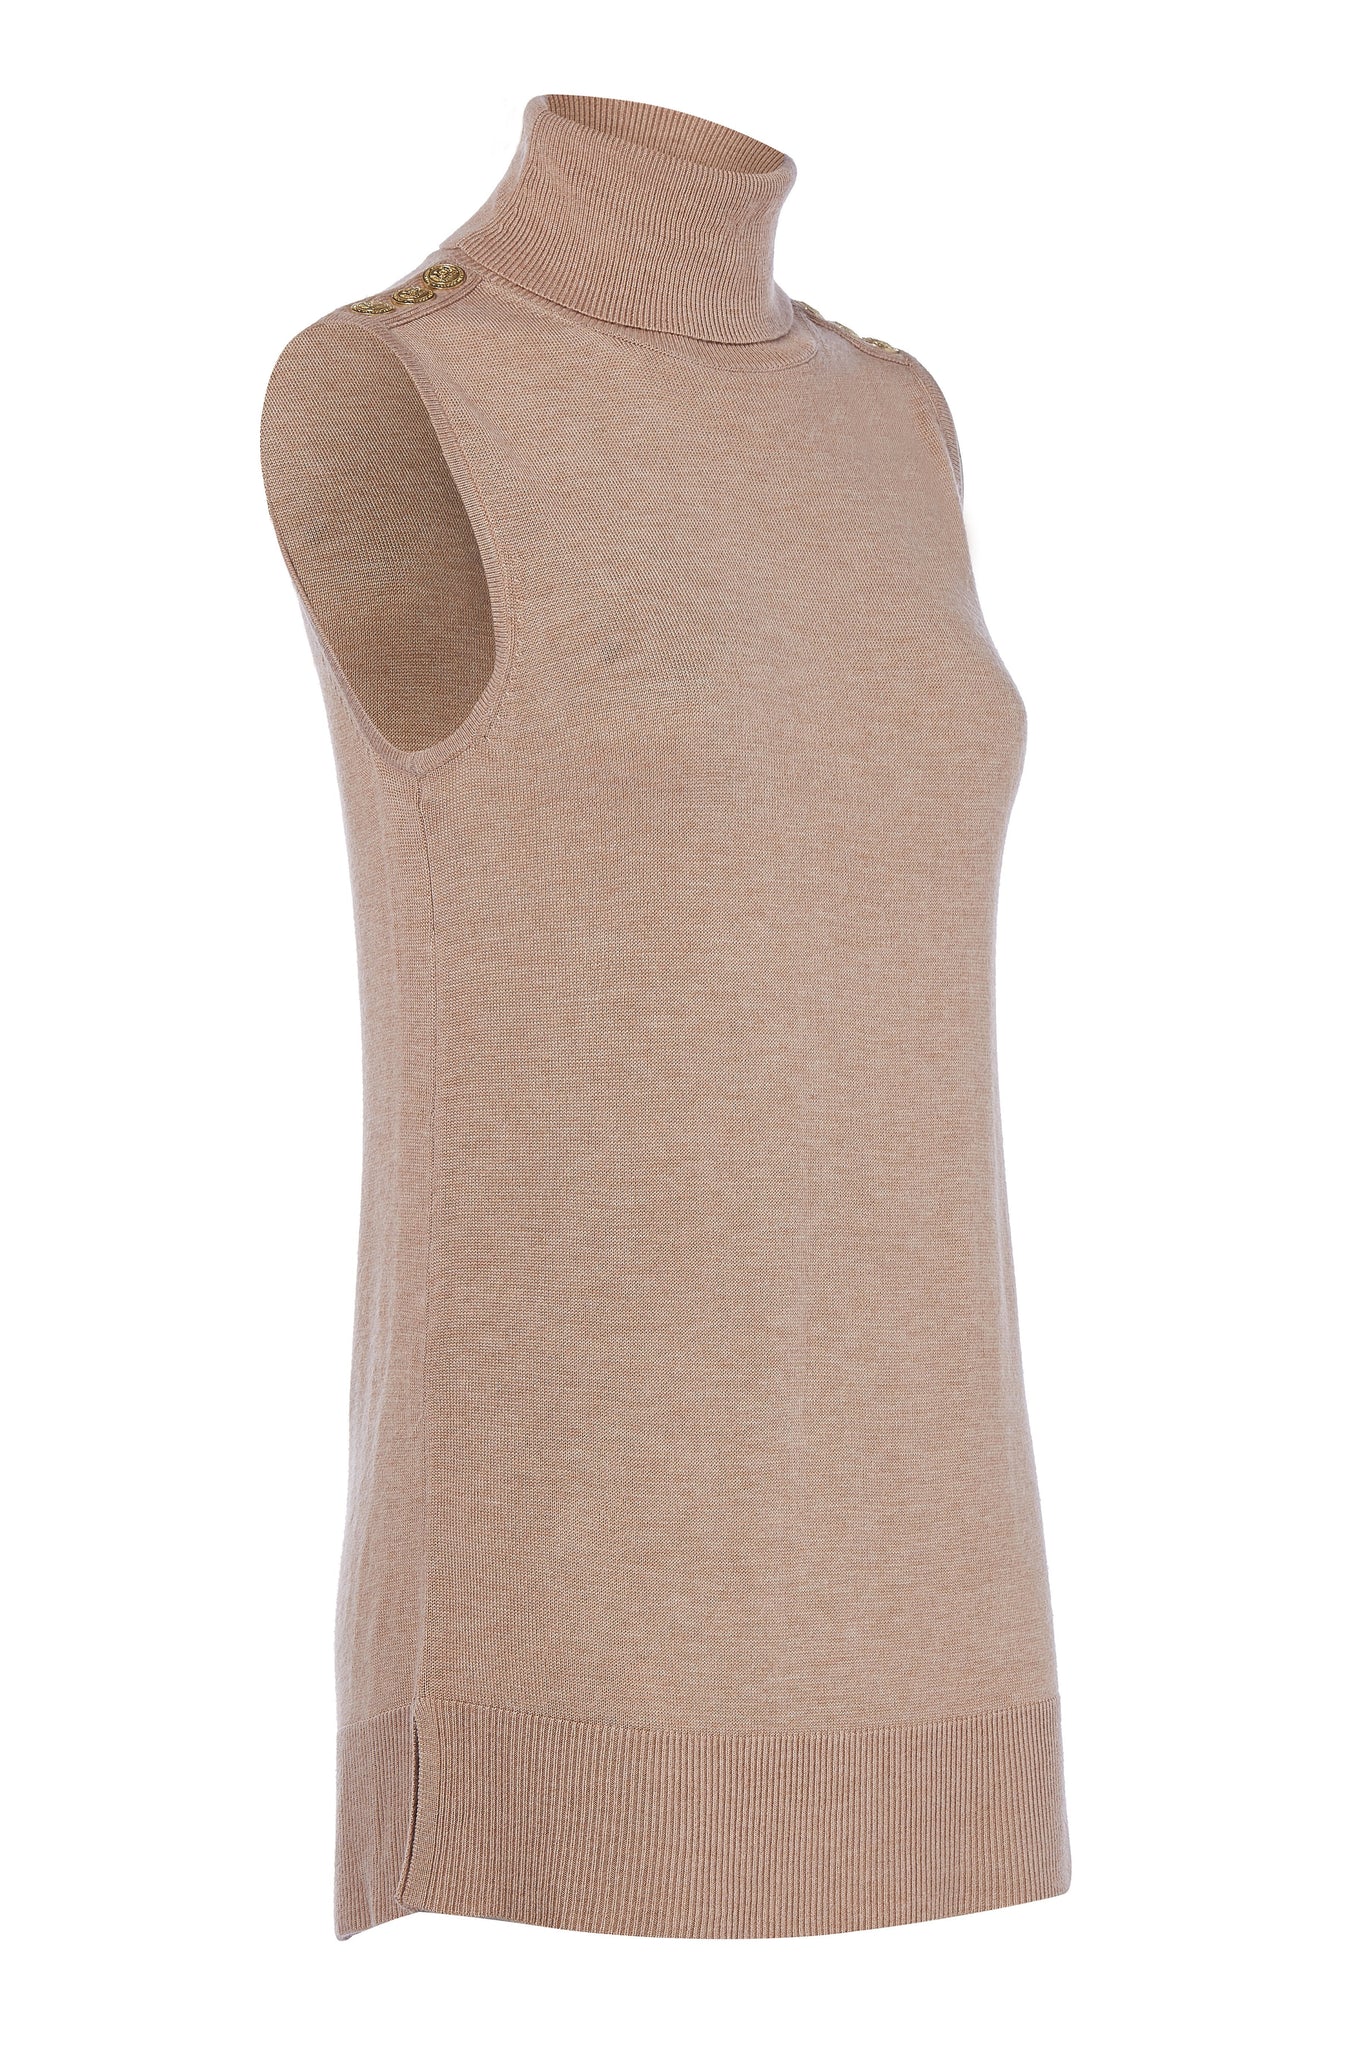 side of fitted lightweight sleeveless rollneck knit in camel with gold button detail across shoulders showing split hem